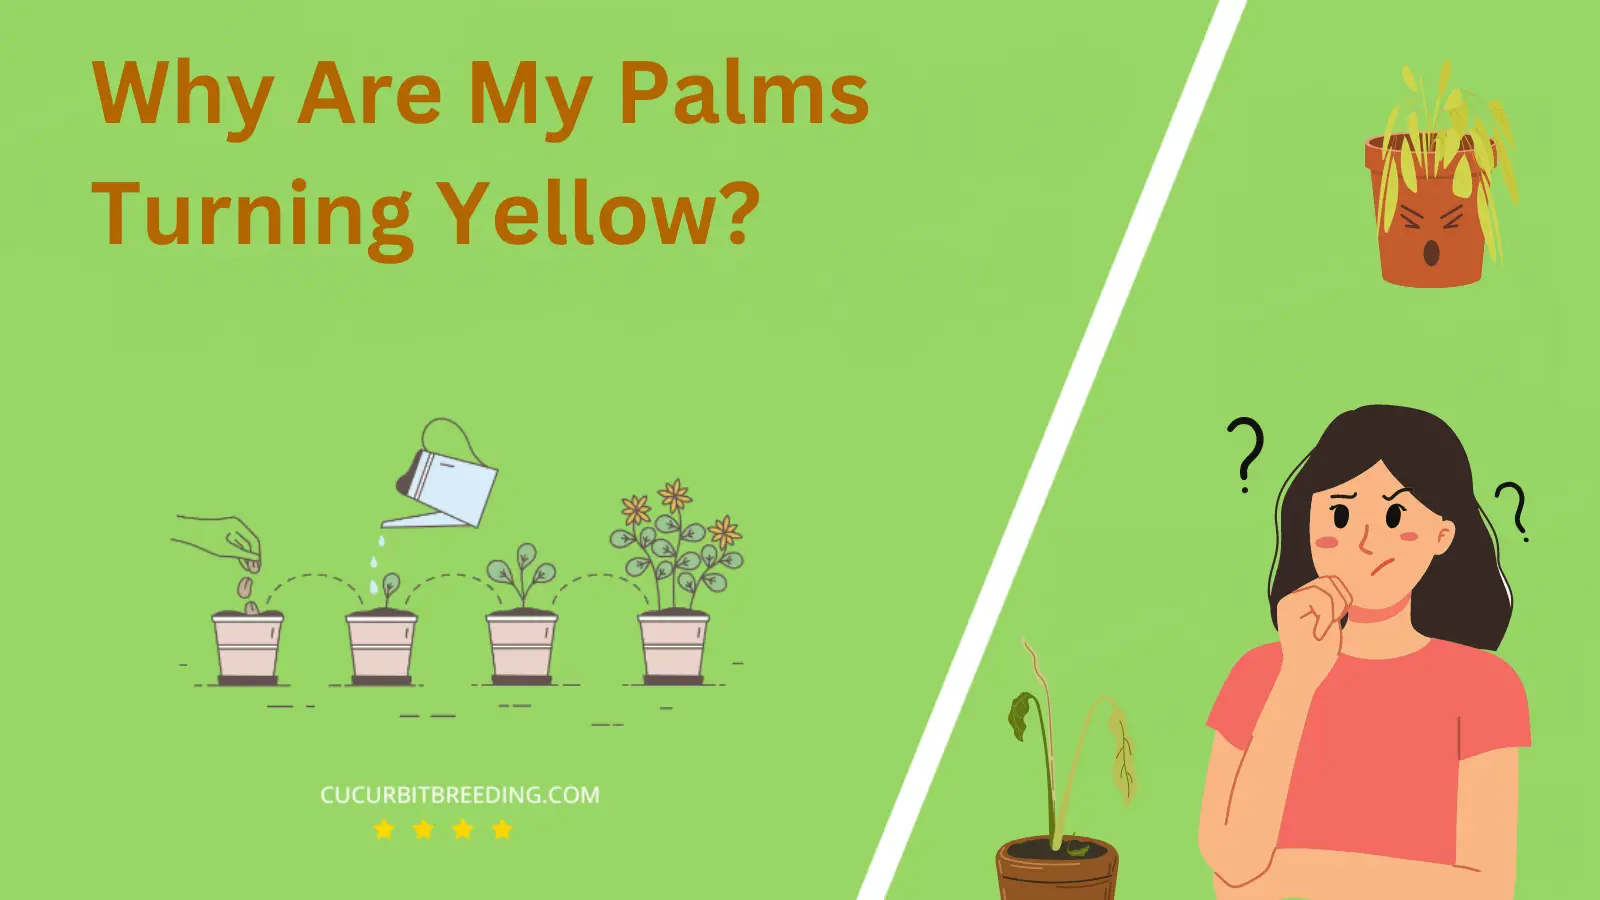 Why Are My Palms Turning Yellow